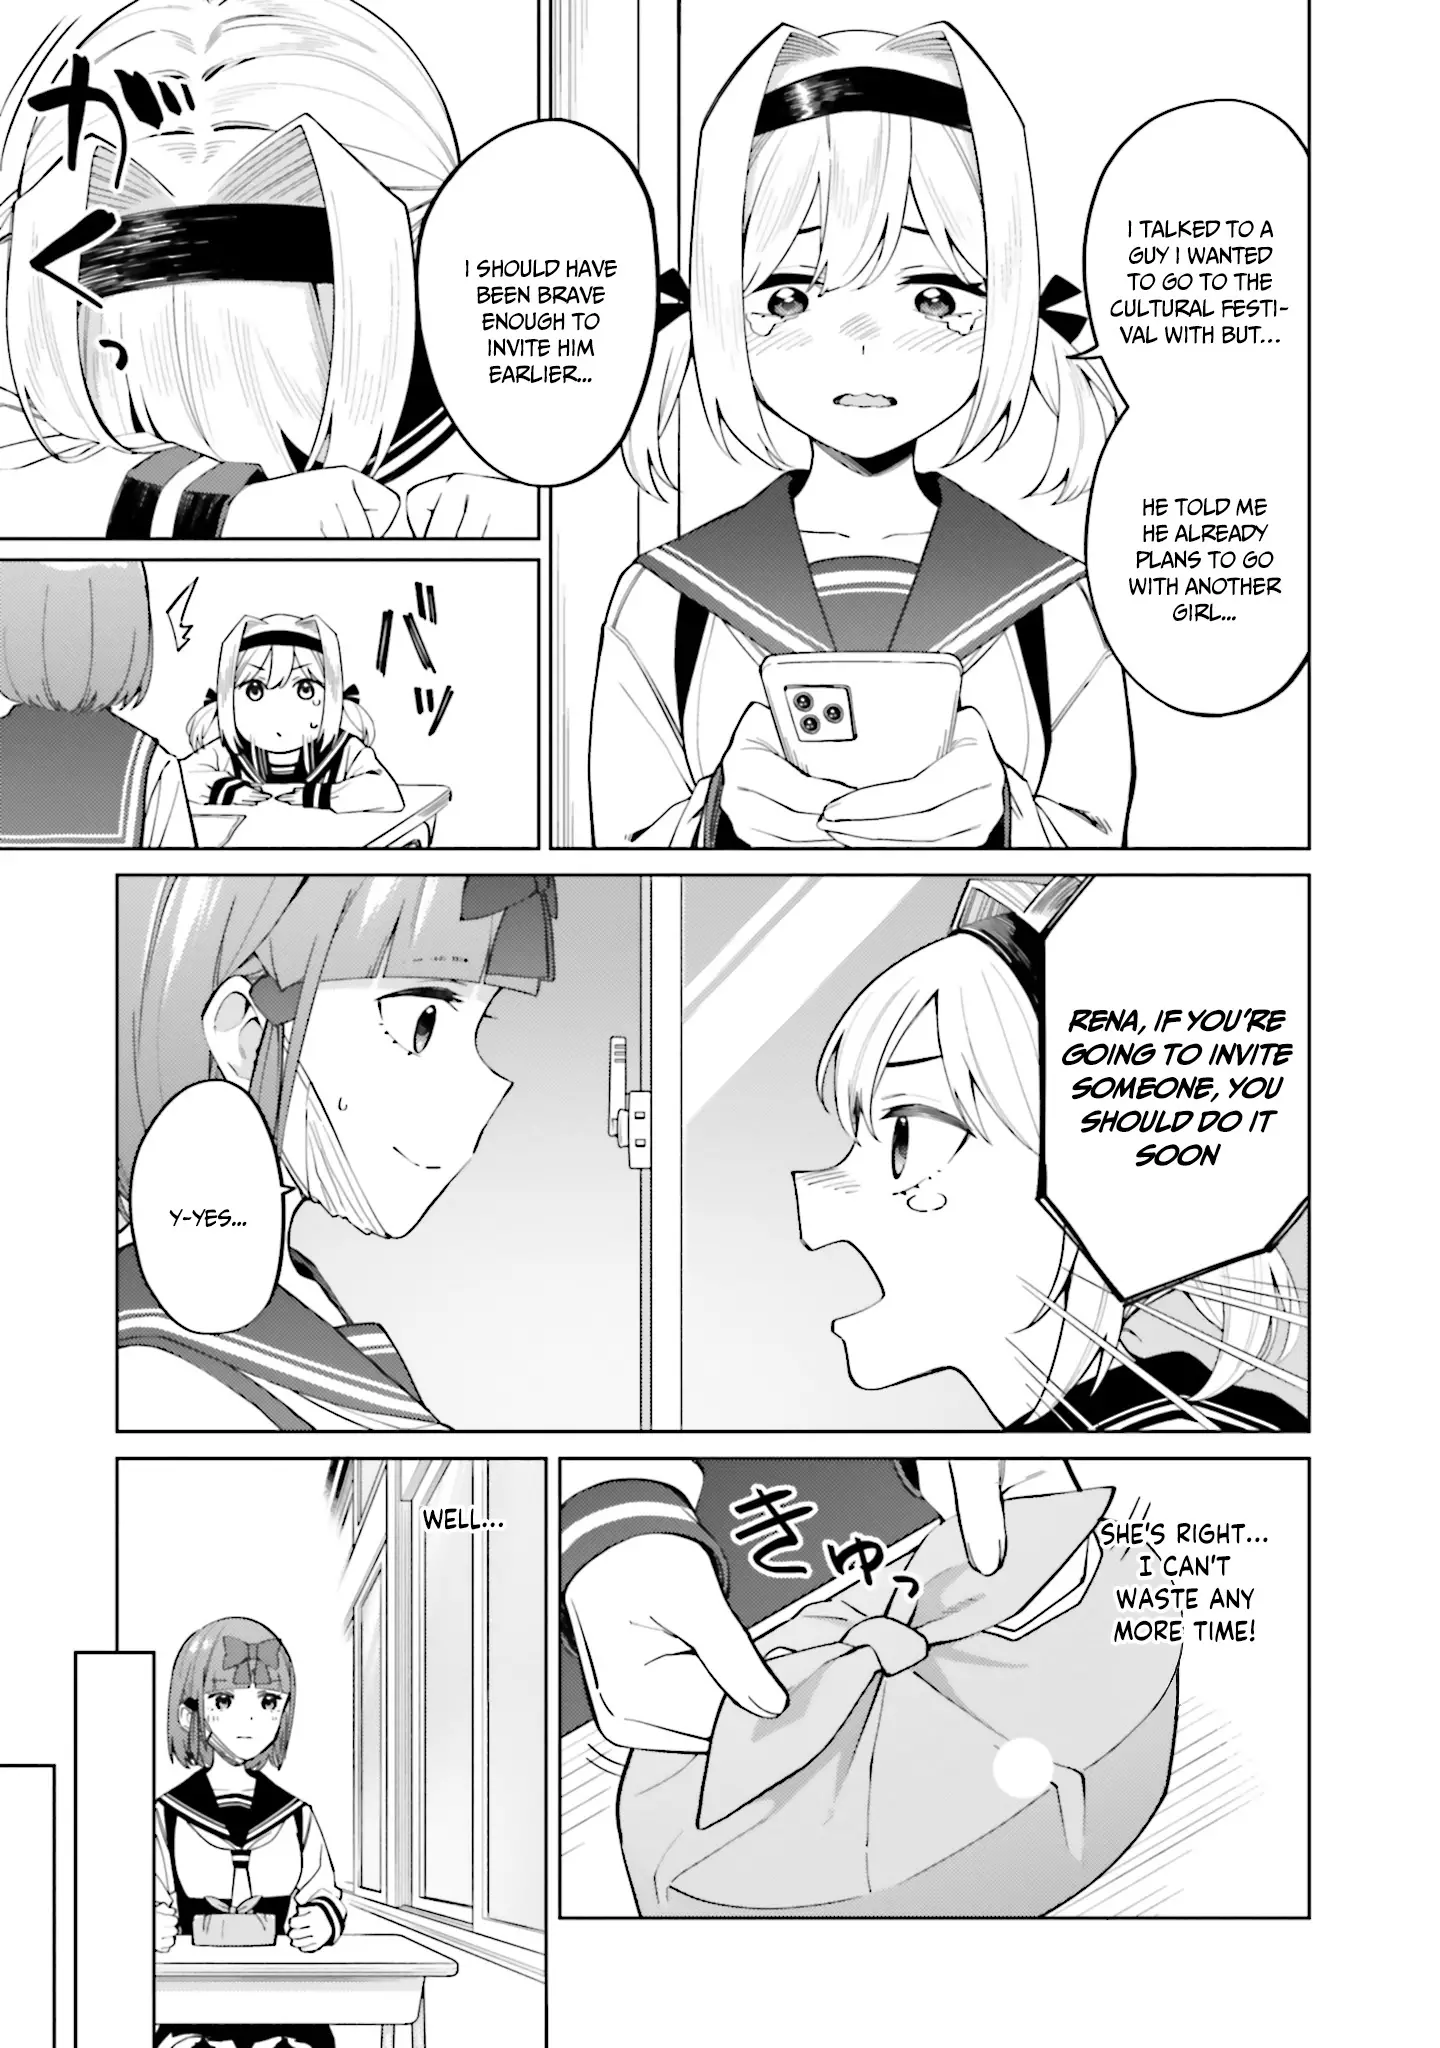 I Don't Understand Shirogane-San's Facial Expression At All - 13 page 22-e484ee8c